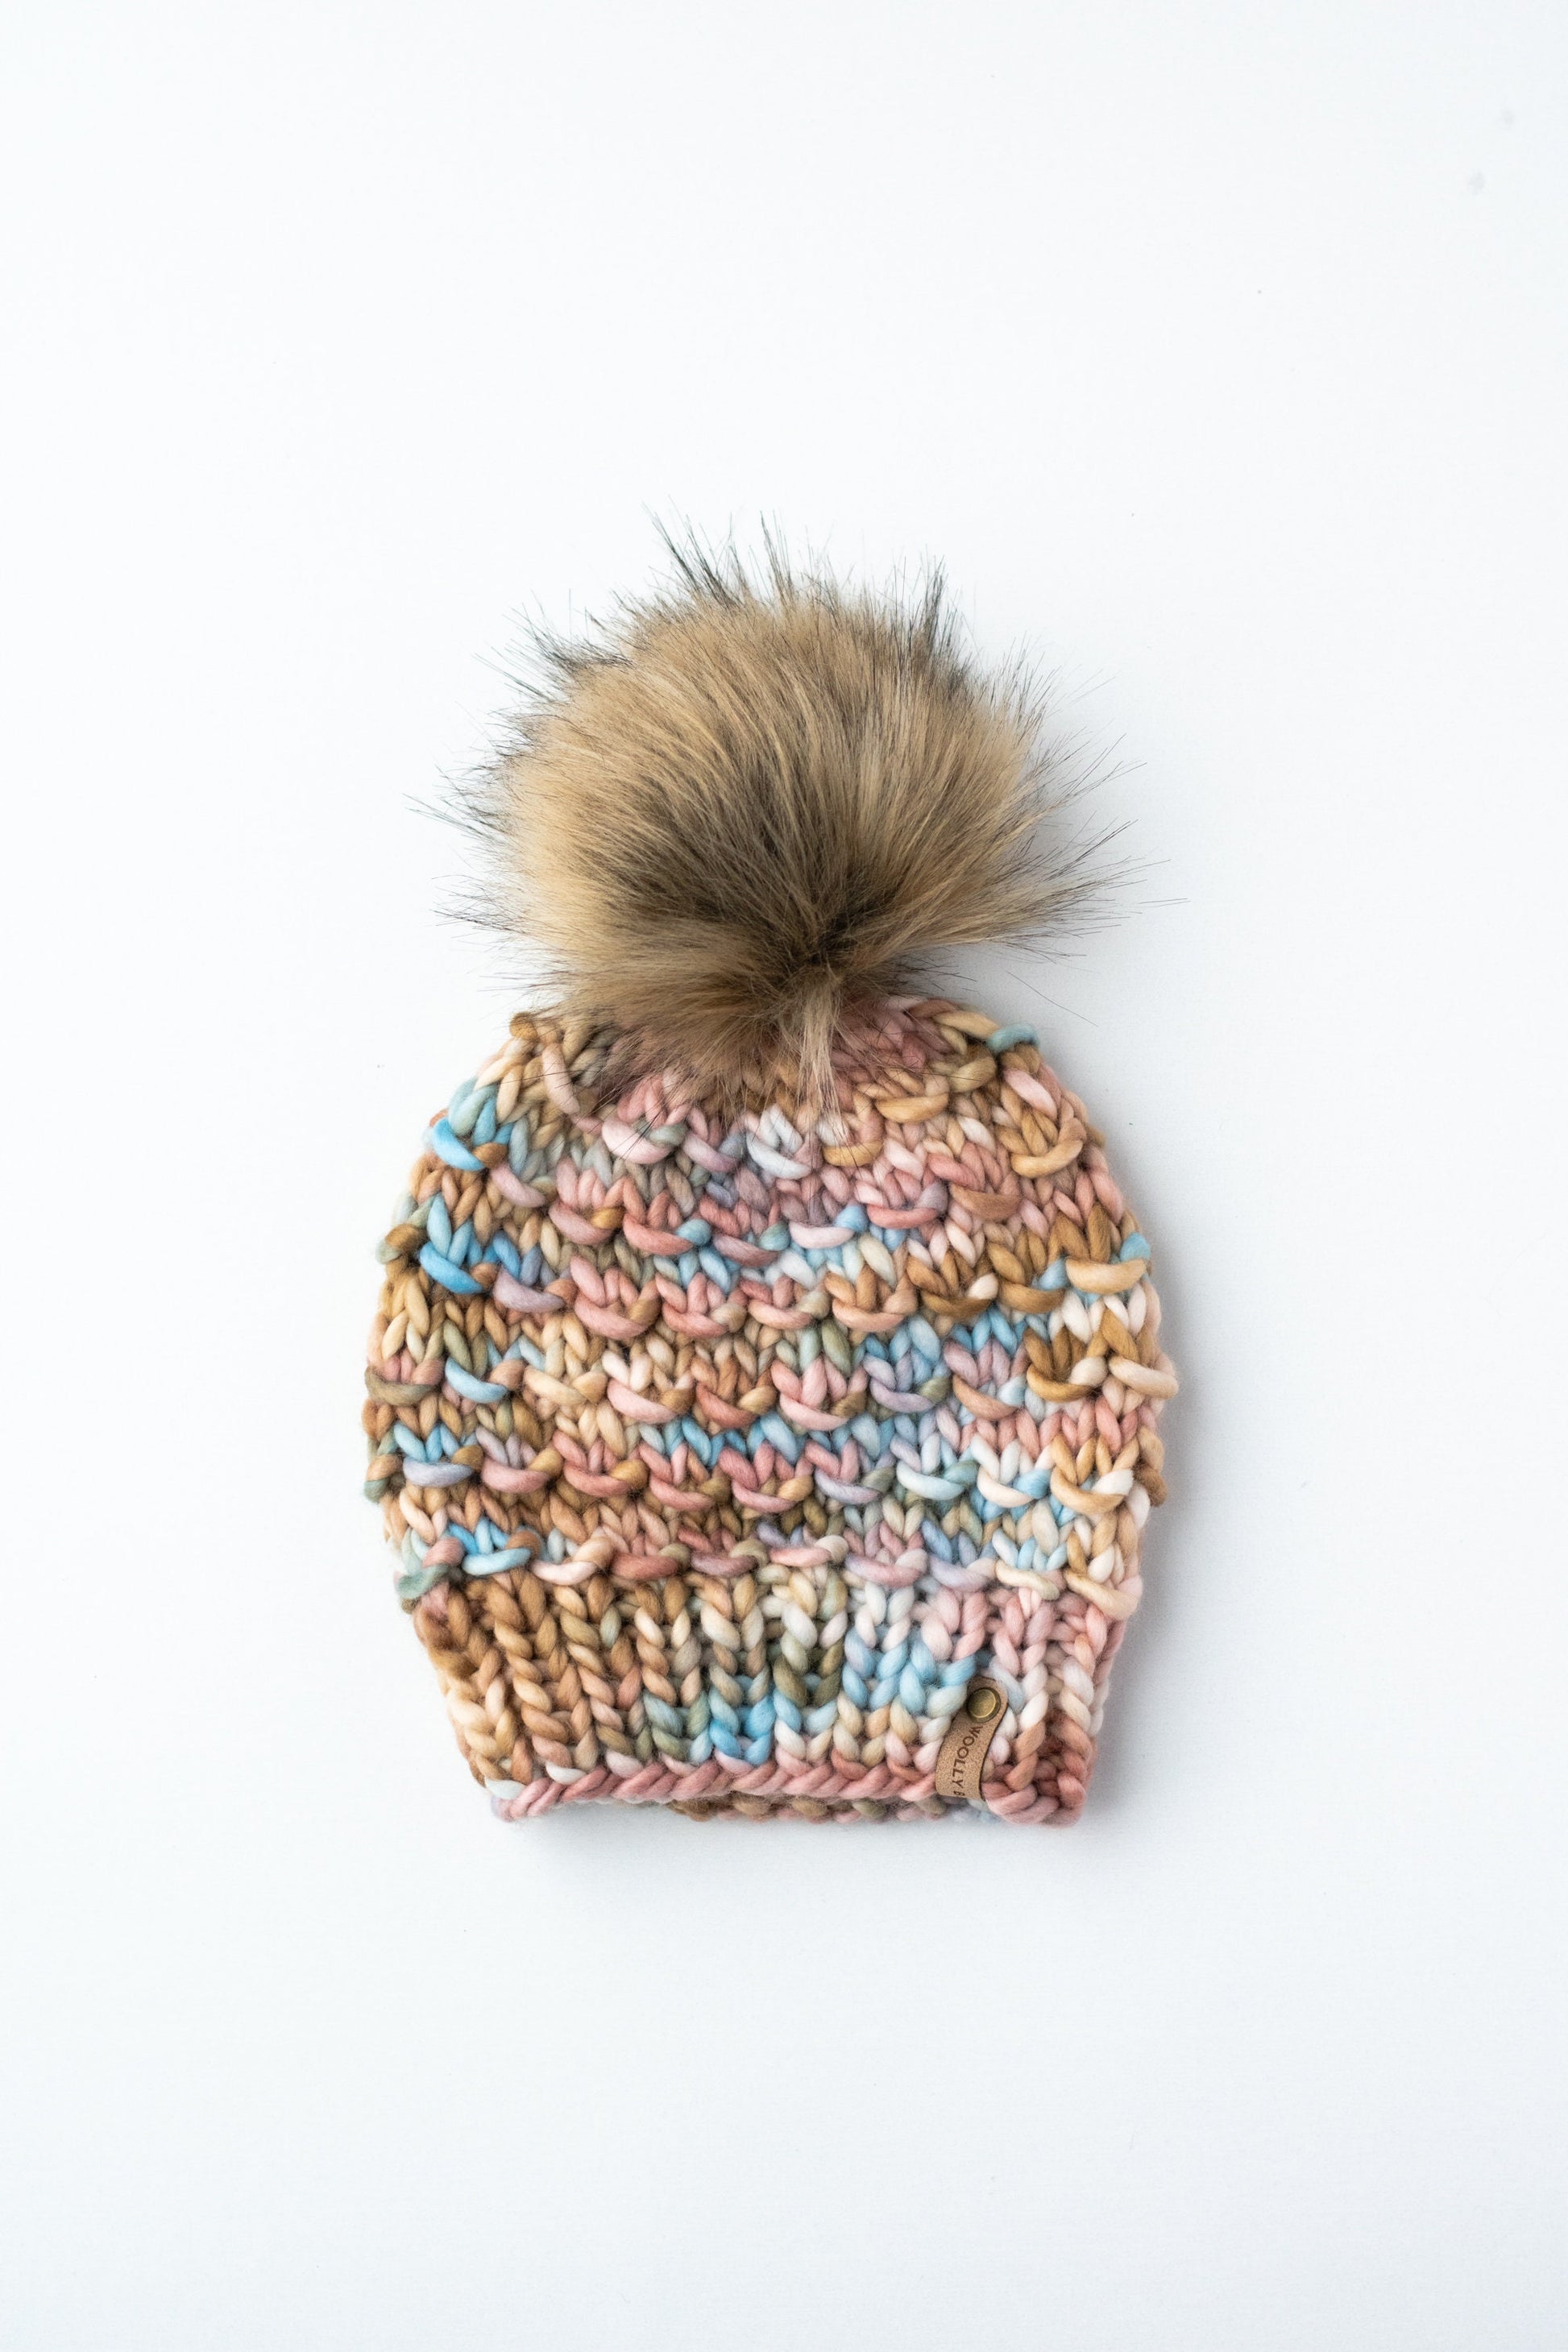 Copper and Blue Merino Wool Knit Hat with Faux Fur Pom Pom